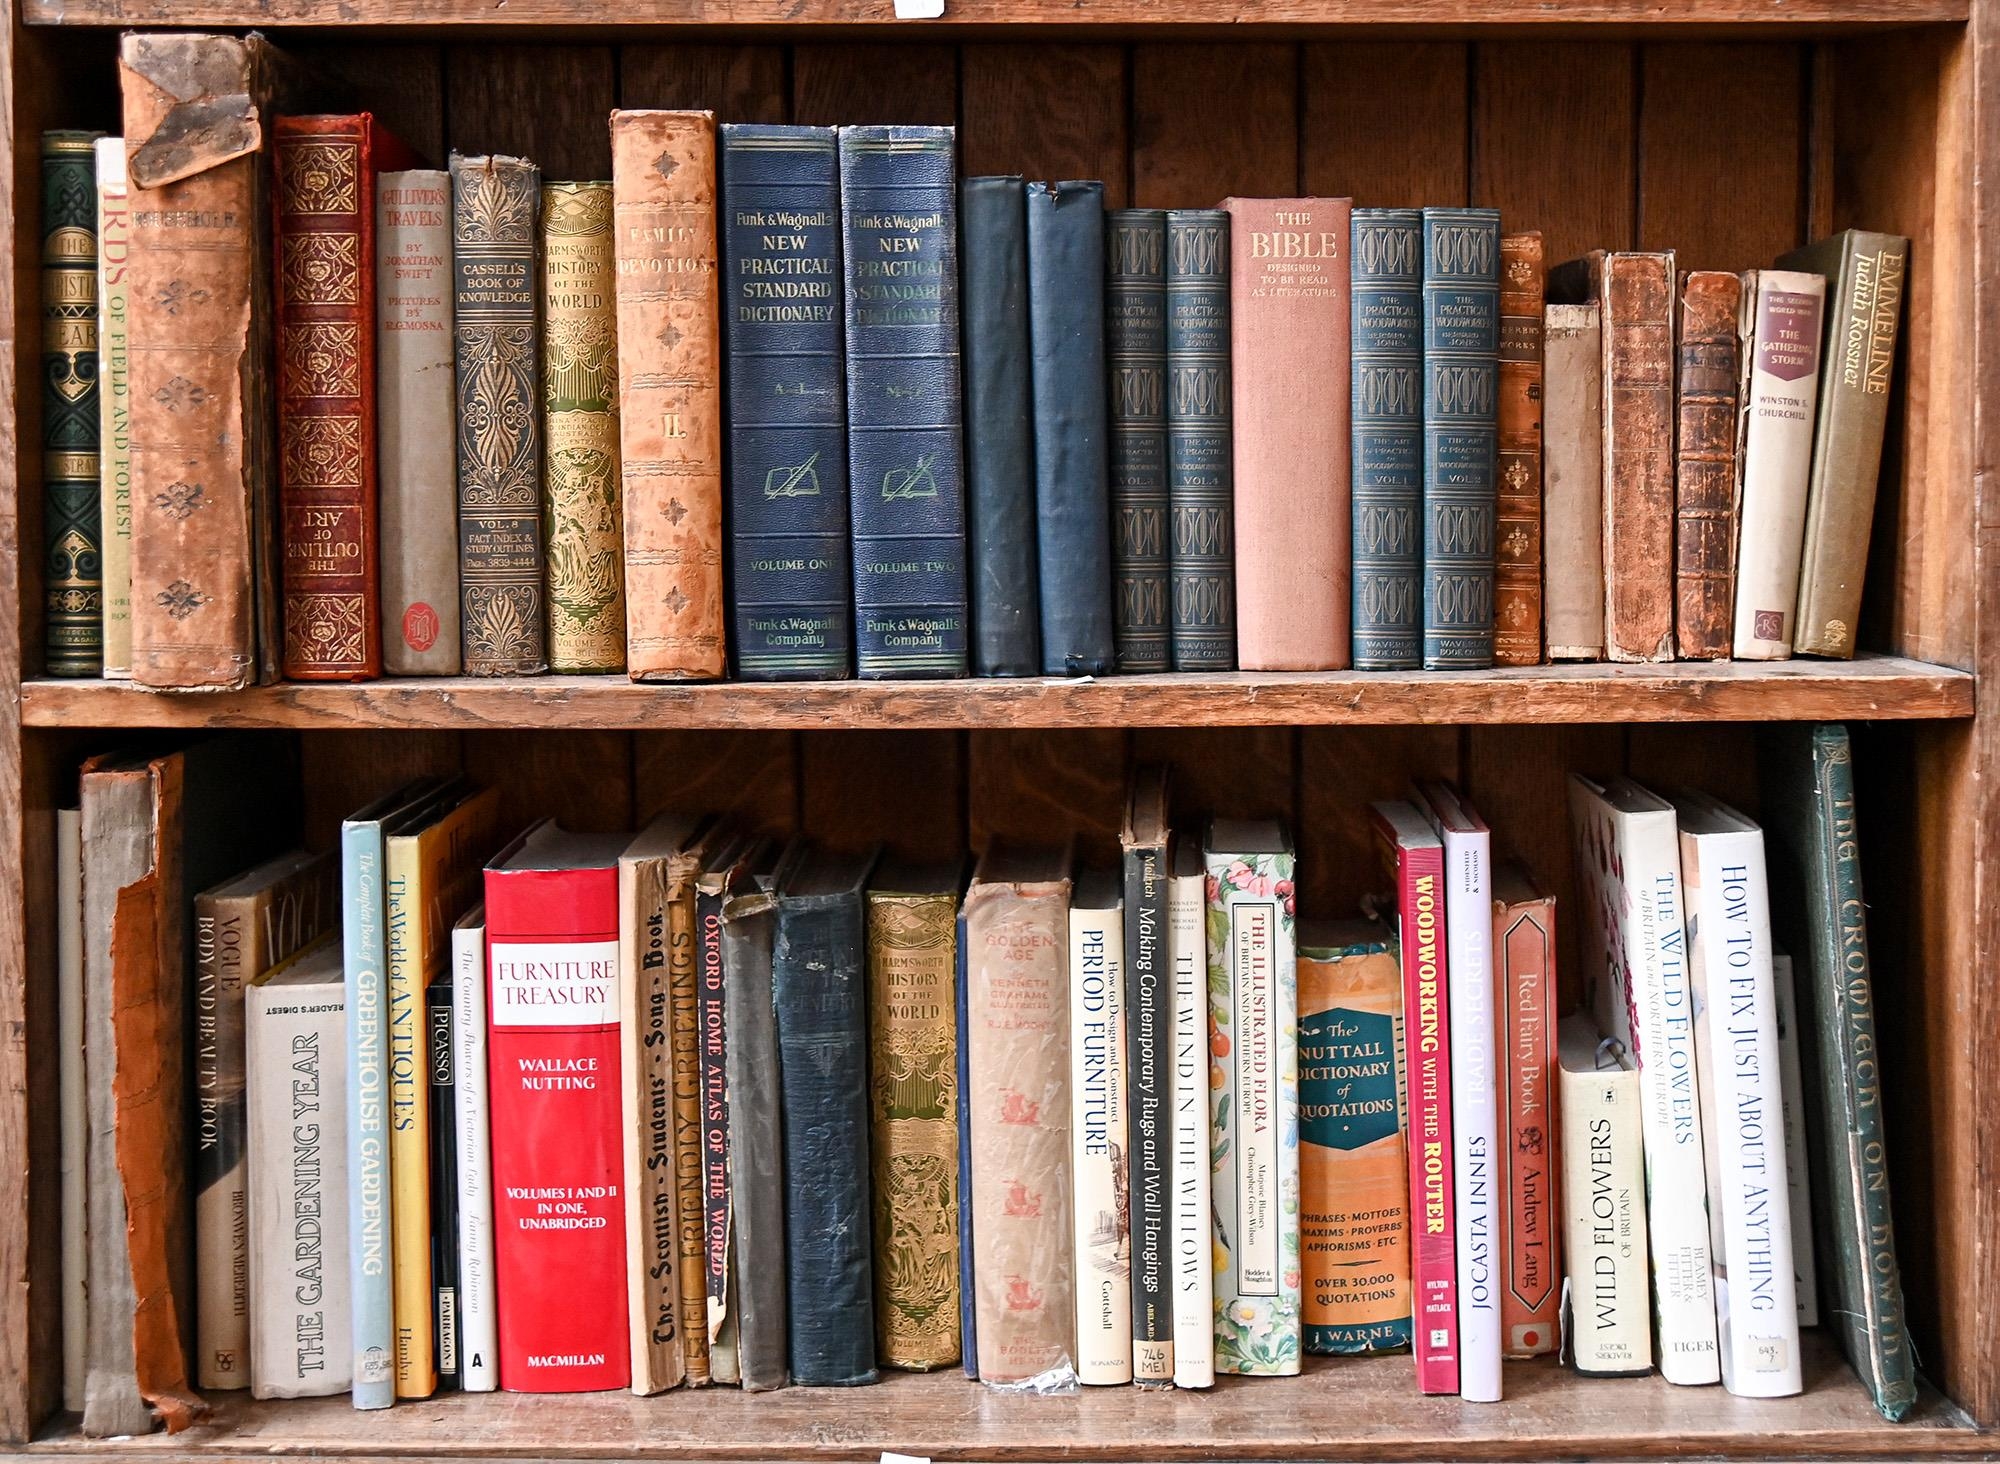 Books. 18 shelves of general stock, including Anon, Village Rhymes, London: R.B. Seeley & W.